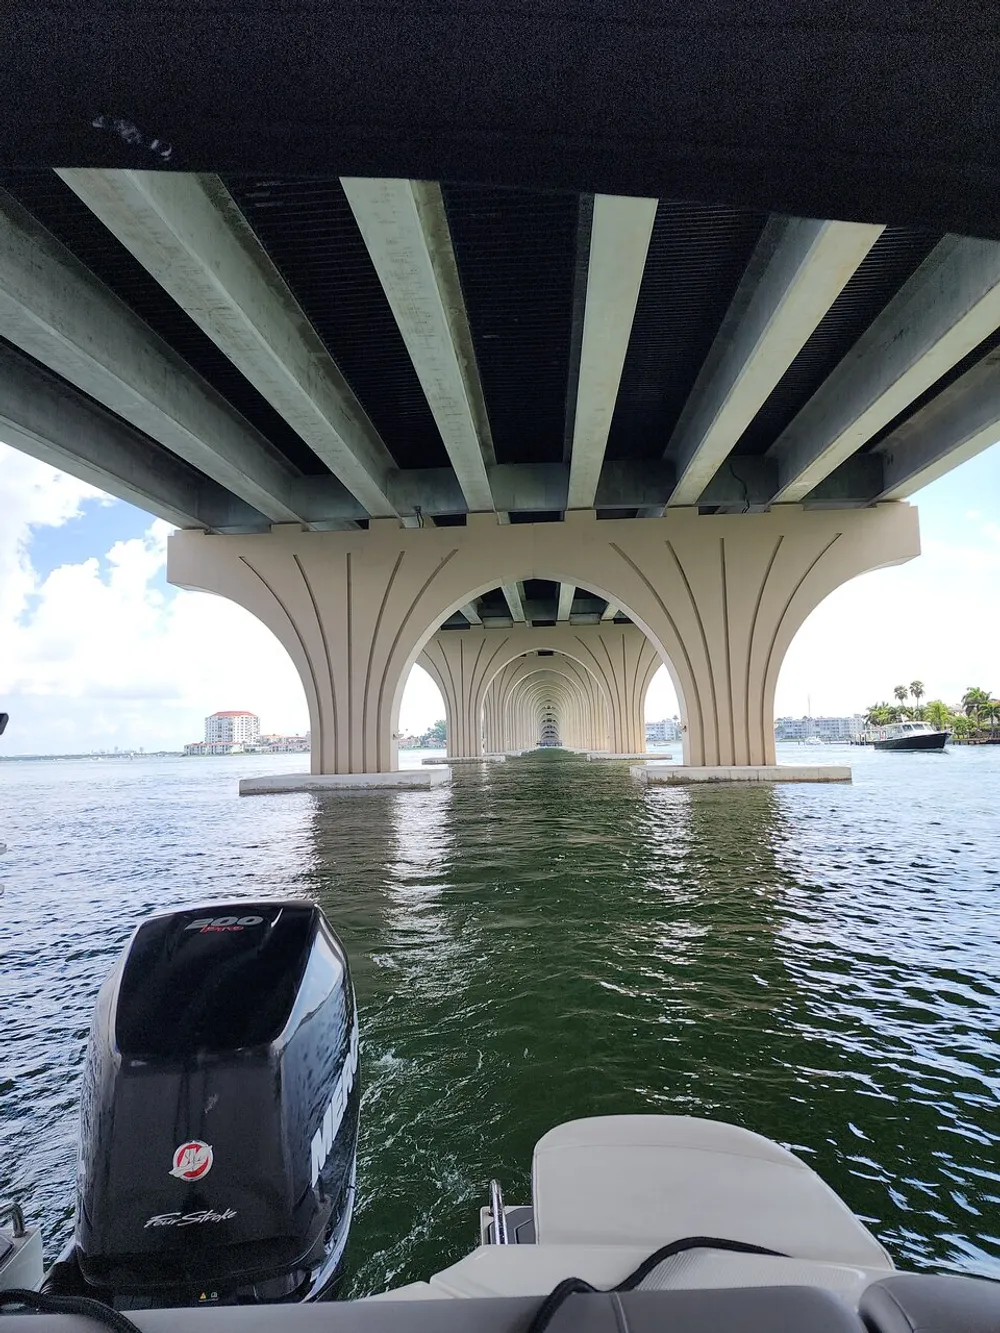 A boat is poised to pass under a long arched concrete bridge spanning a body of water creating a symmetrical tunnel-like effect